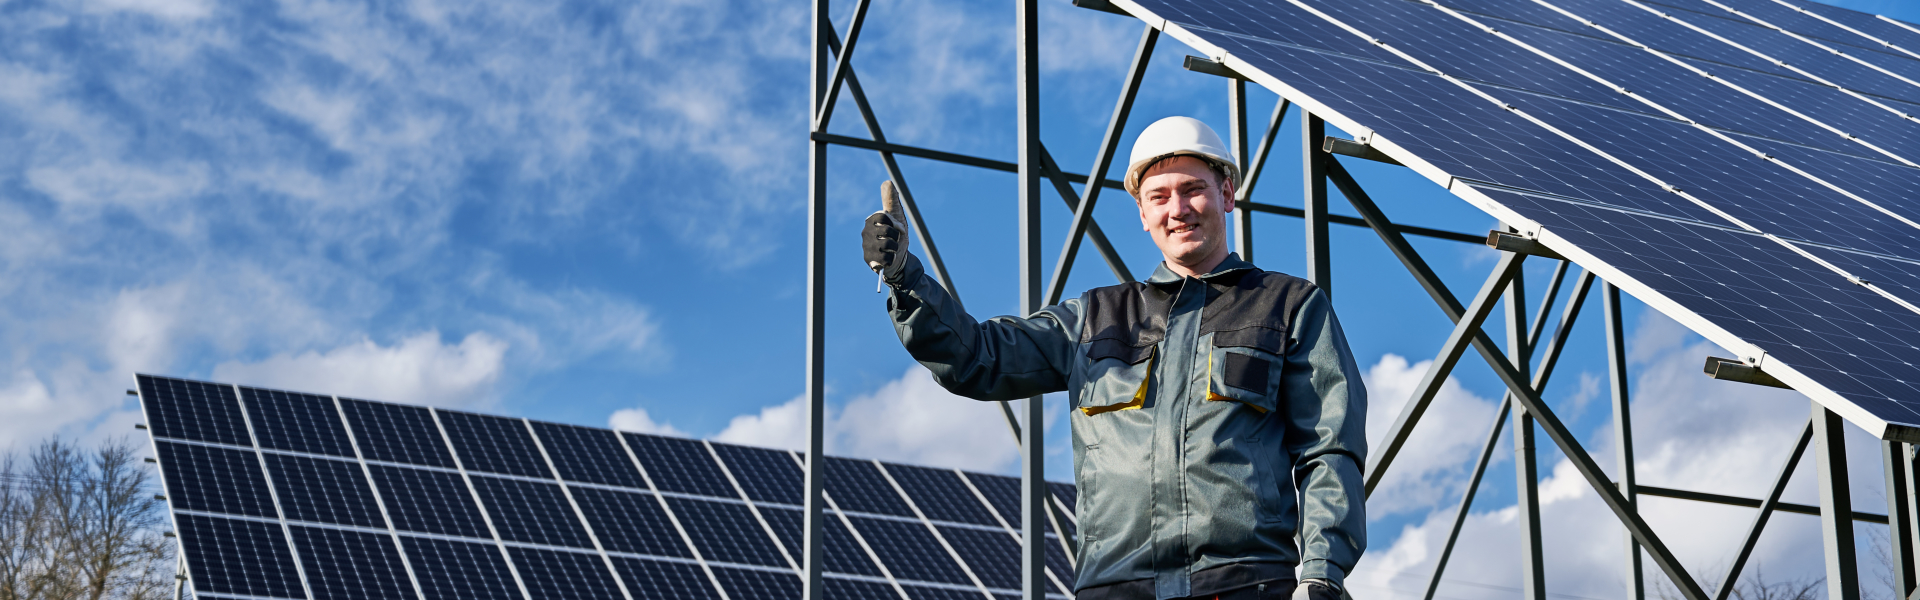 Man technician showing approval gesture thumbs up while standing near solar photovoltaic panel system